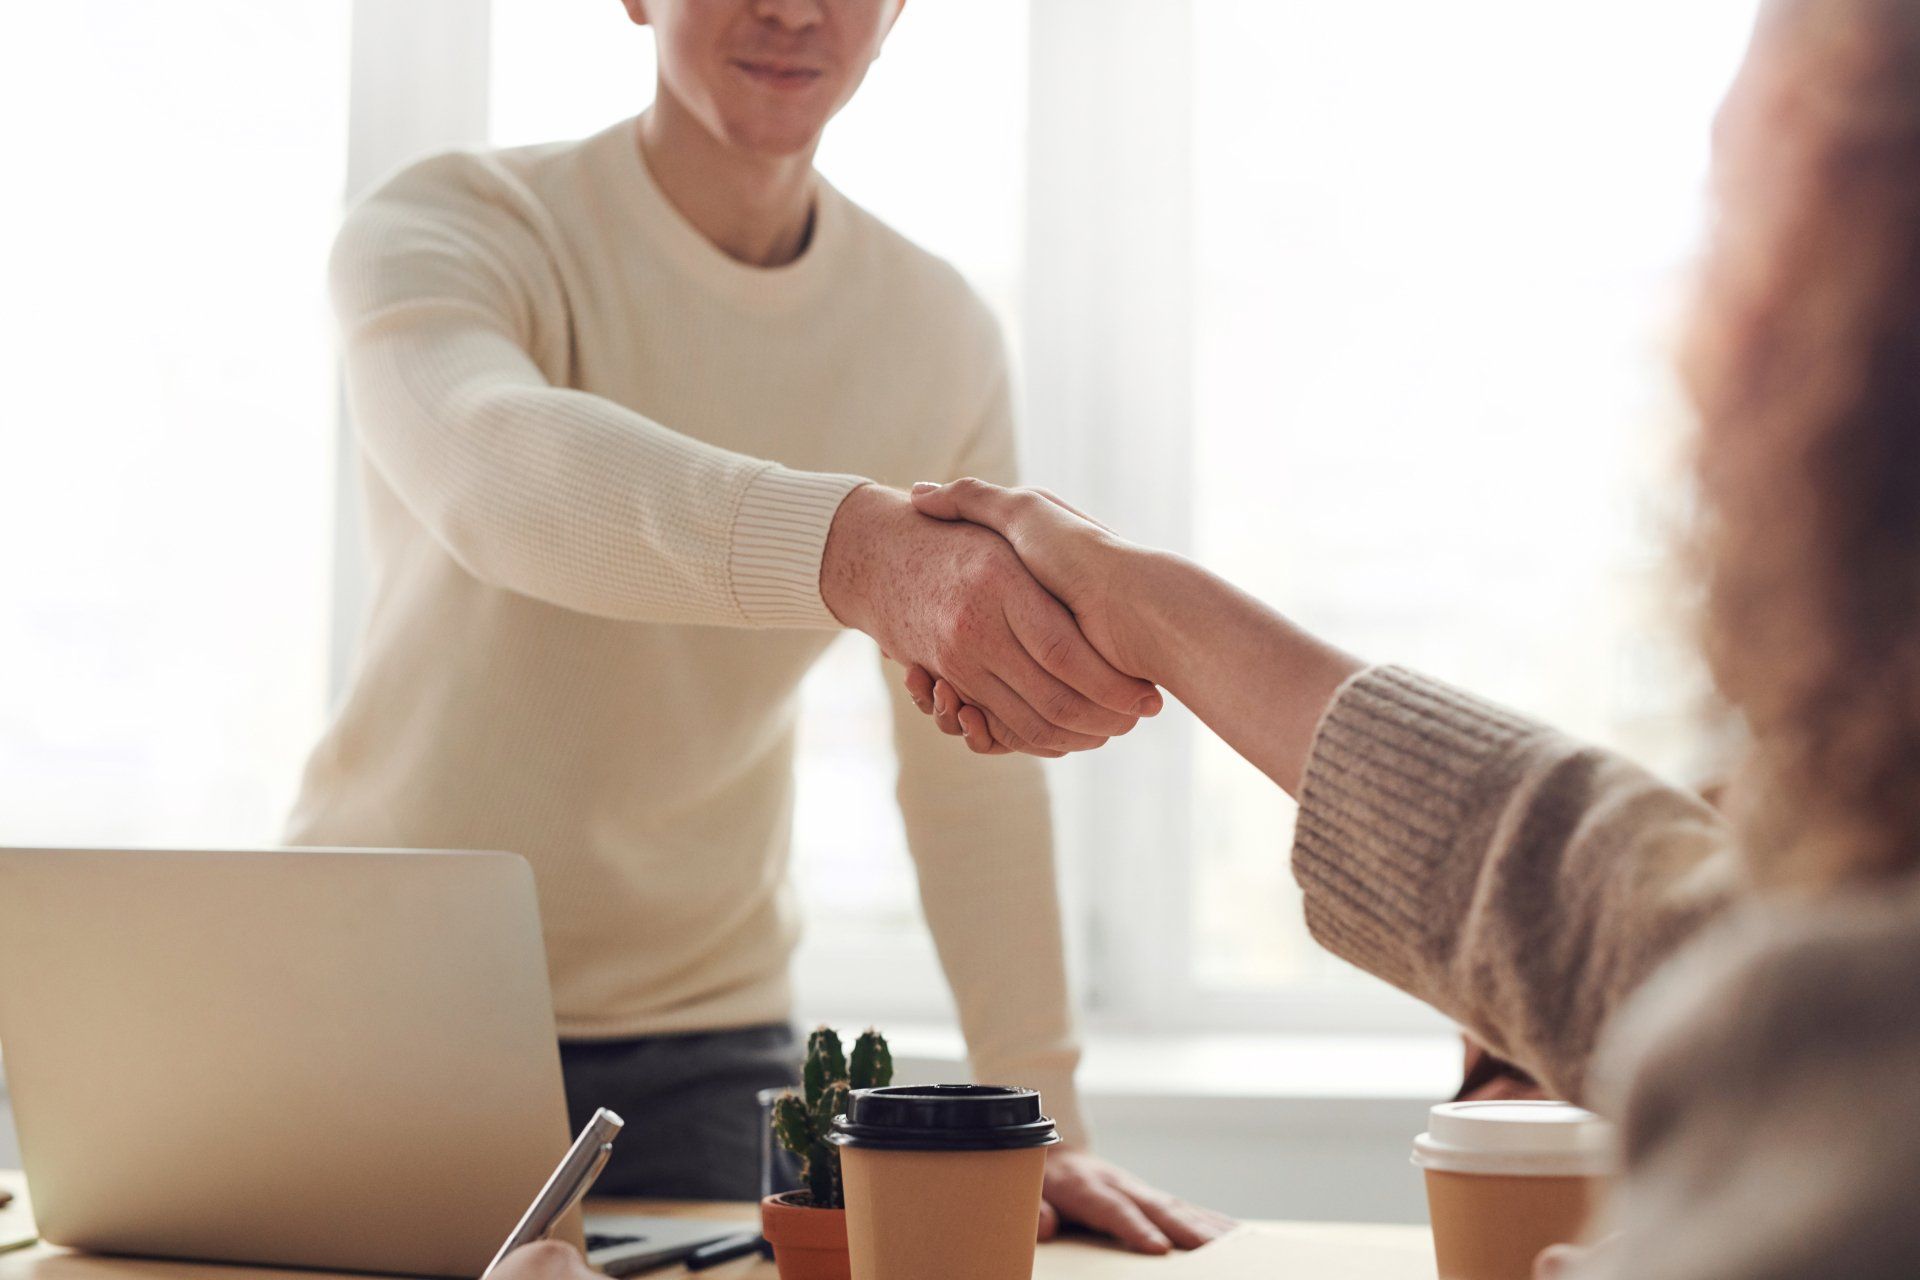 A man and a woman are shaking hands in an office.